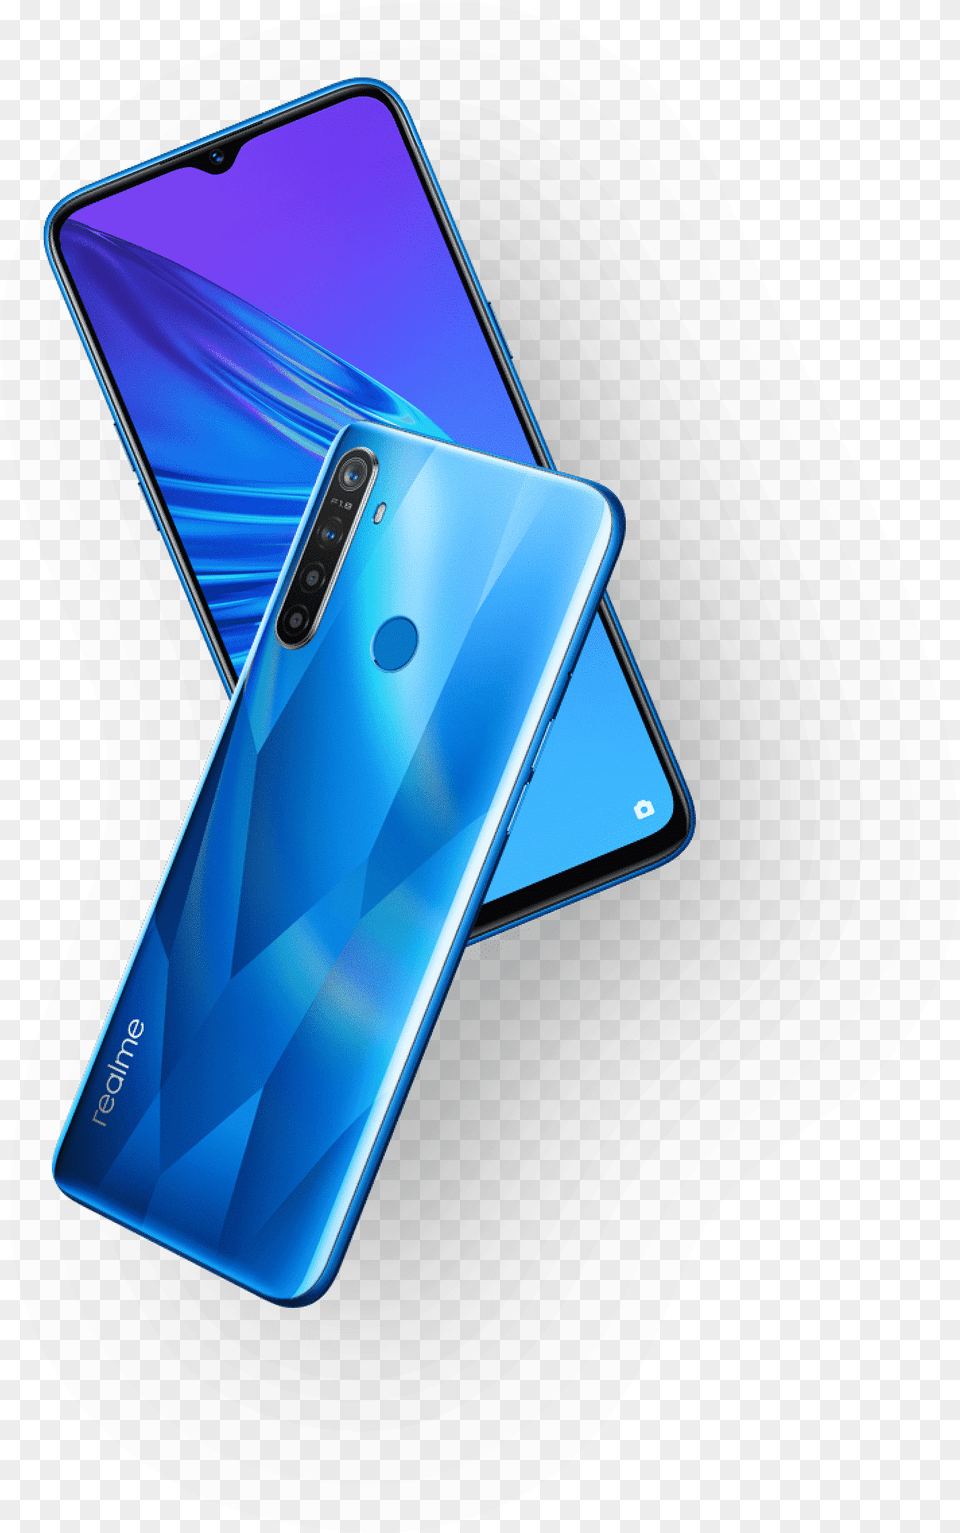 Oppo Realme 5 Pictures Realme 5 Pro Price In Philippines, Electronics, Mobile Phone, Phone Png Image